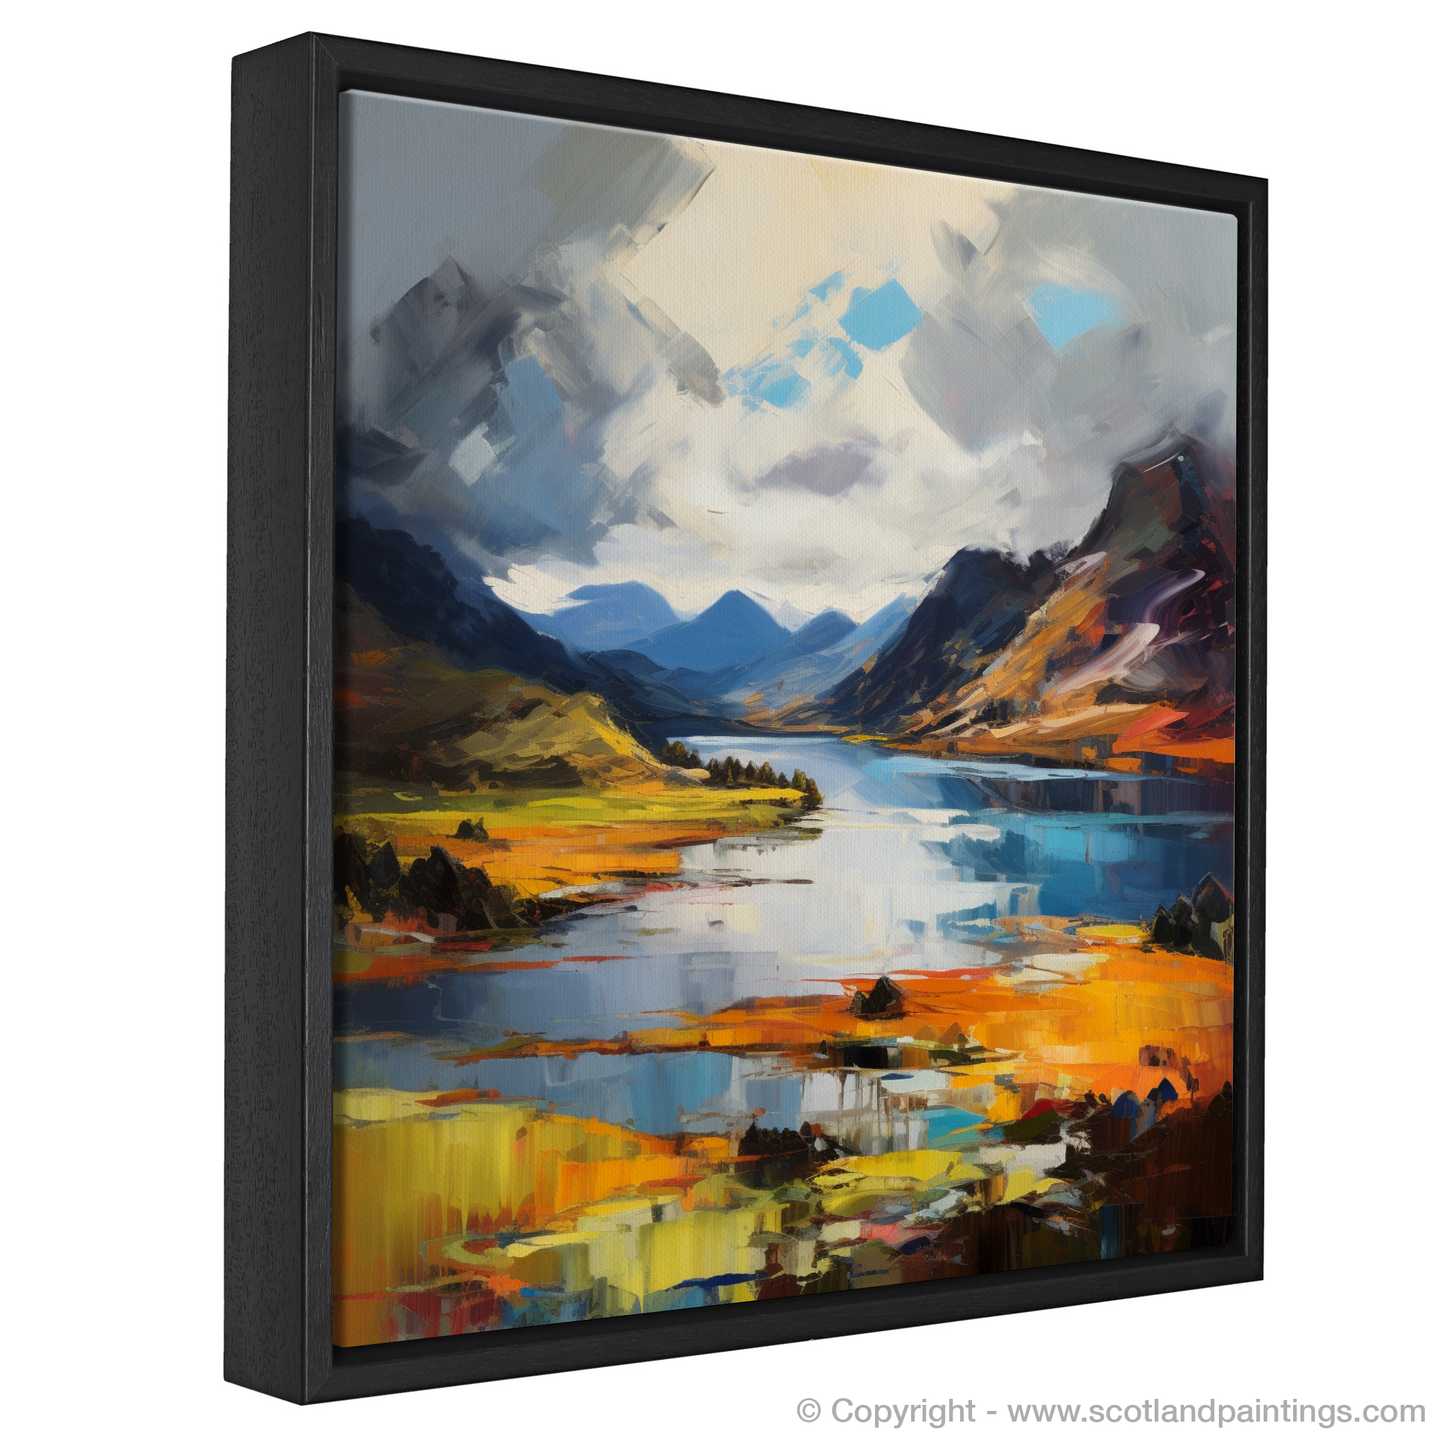 Painting and Art Print of Loch Shiel, Highlands entitled "Highland Reverie: An Expressionist Ode to Loch Shiel".